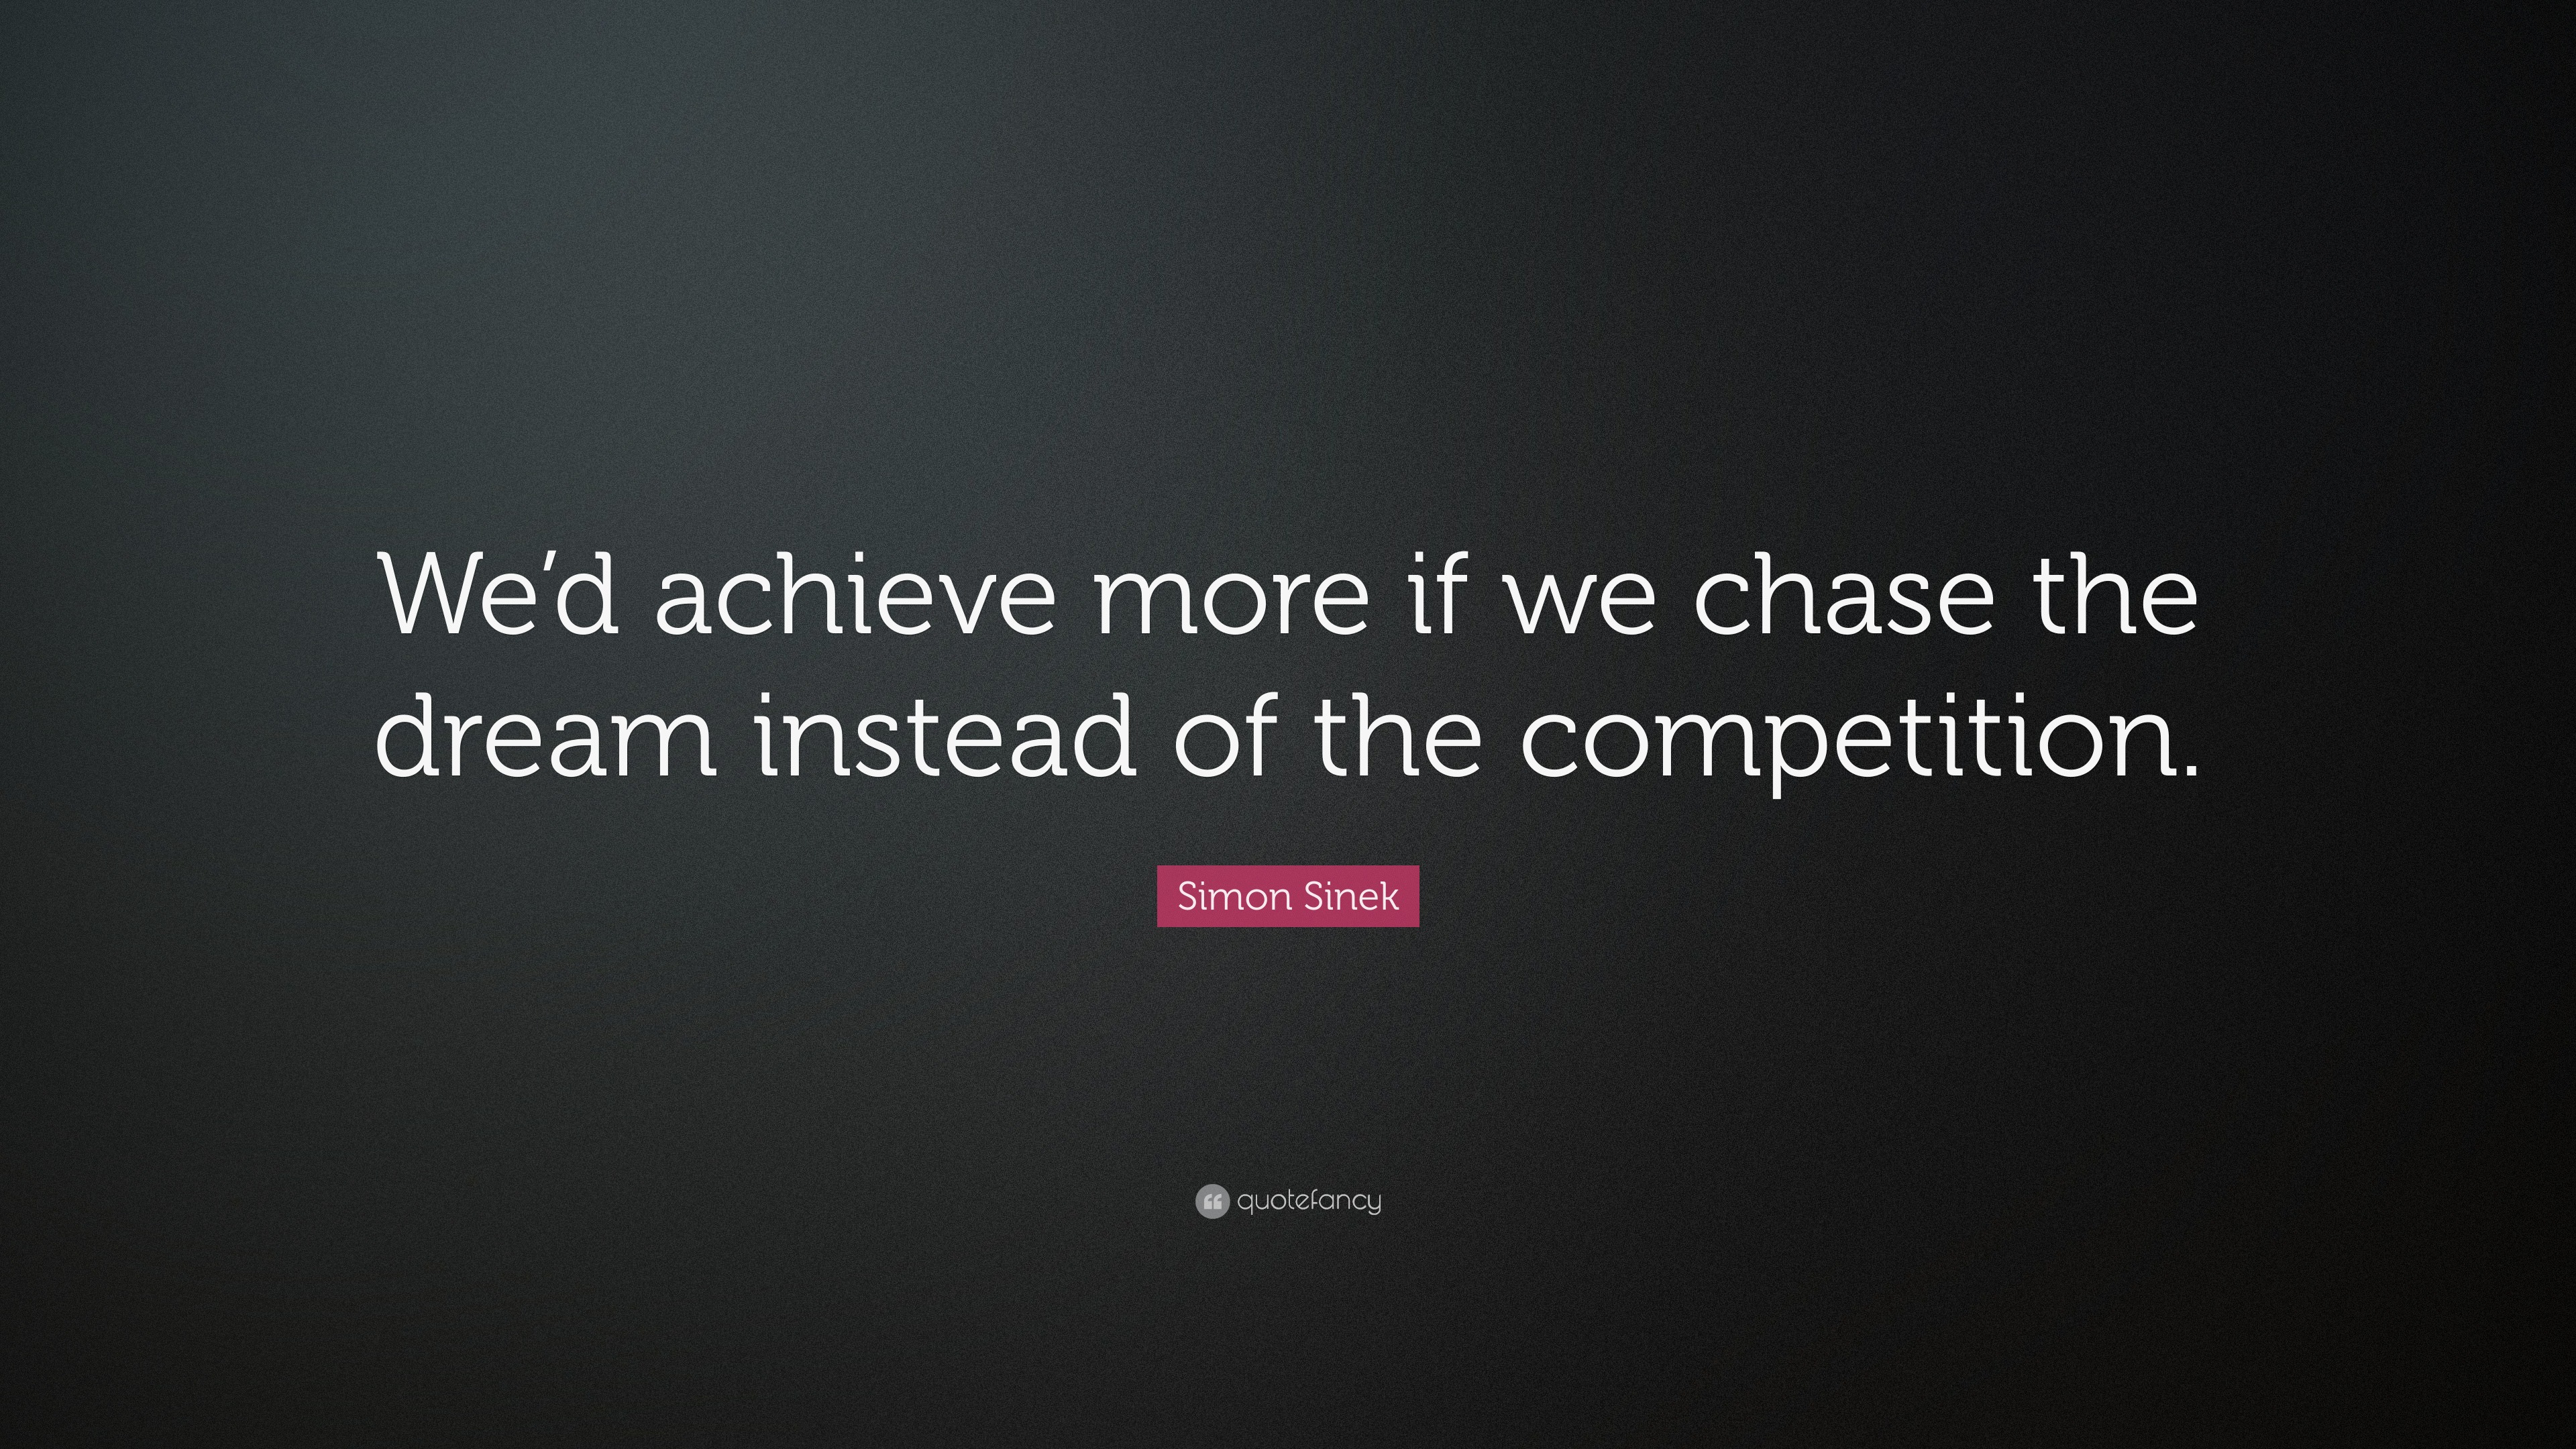 Simon Sinek Quote: “We’d achieve more if we chase the dream instead of ...